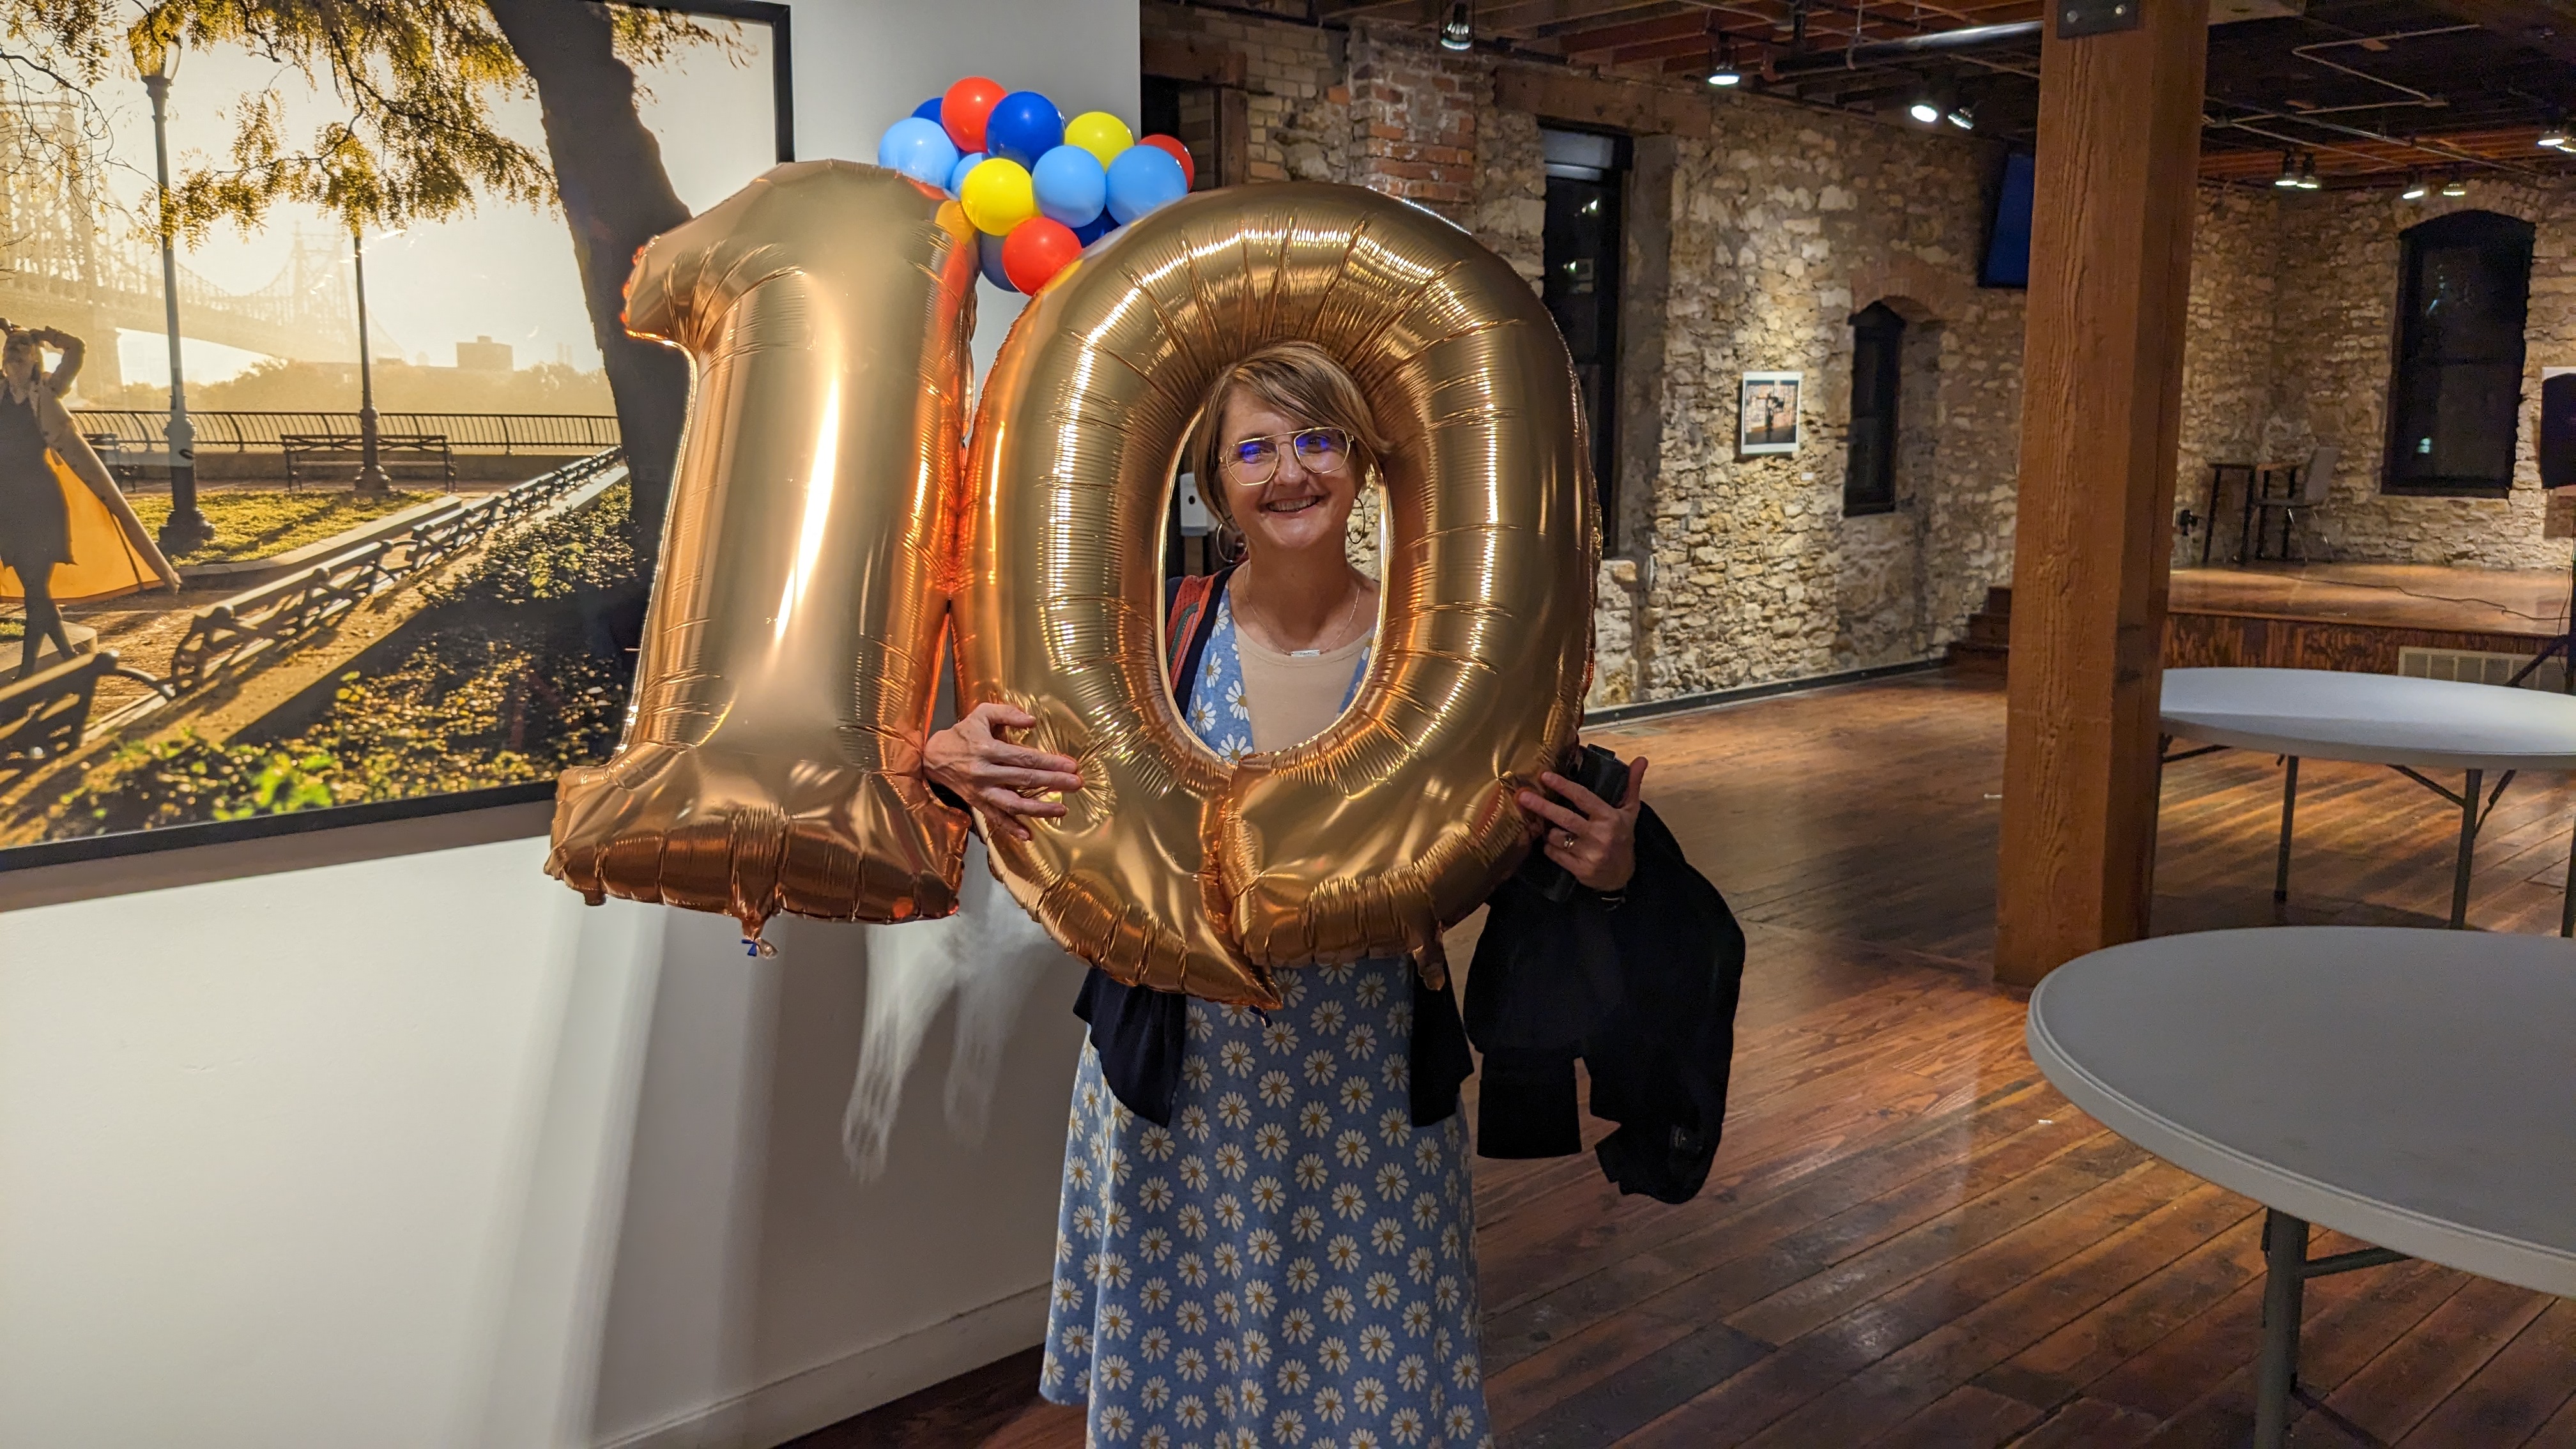 CPPR Director Jackie Counts holds a large 10-shaped balloon at the Cider Gallery in Lawrence, Kansas. 2013 is also the ten year anniversary of Center for Public Partnerships & Research.